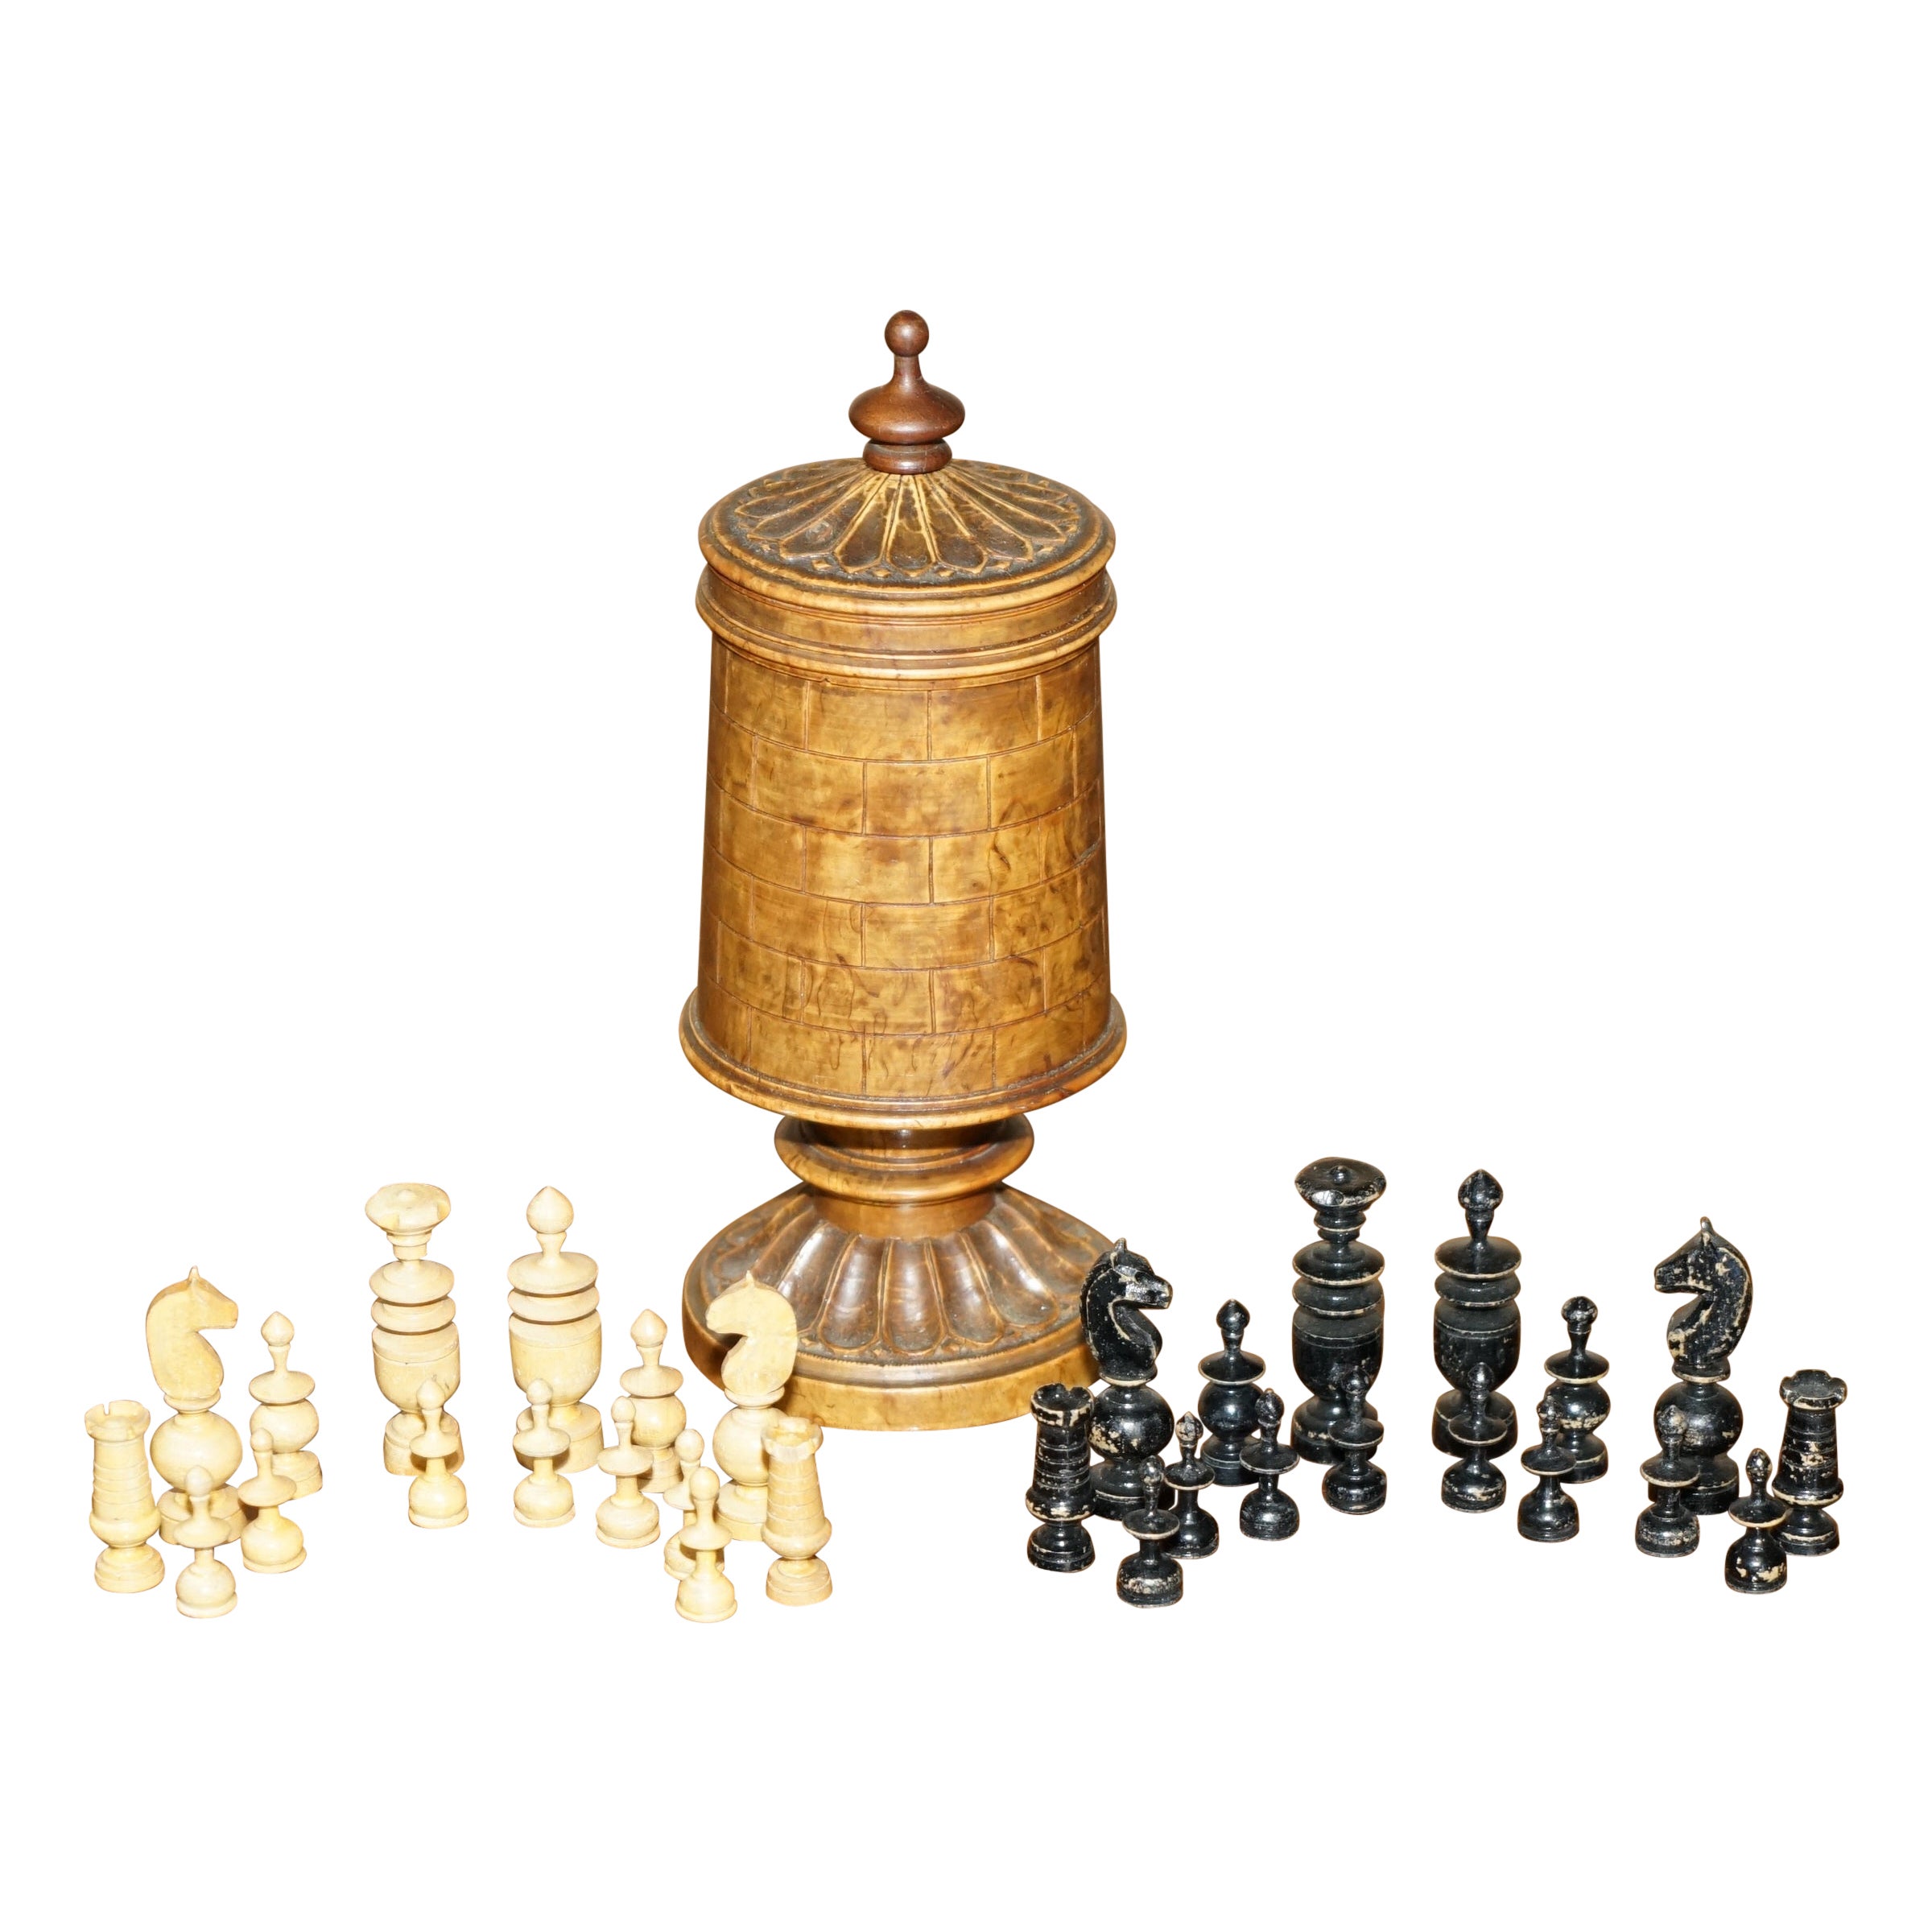 FINE 18. JAHRE TurNED CASTLE POT HOLDING PERiOD CARVED CHESS Set MUST SEE im Angebot